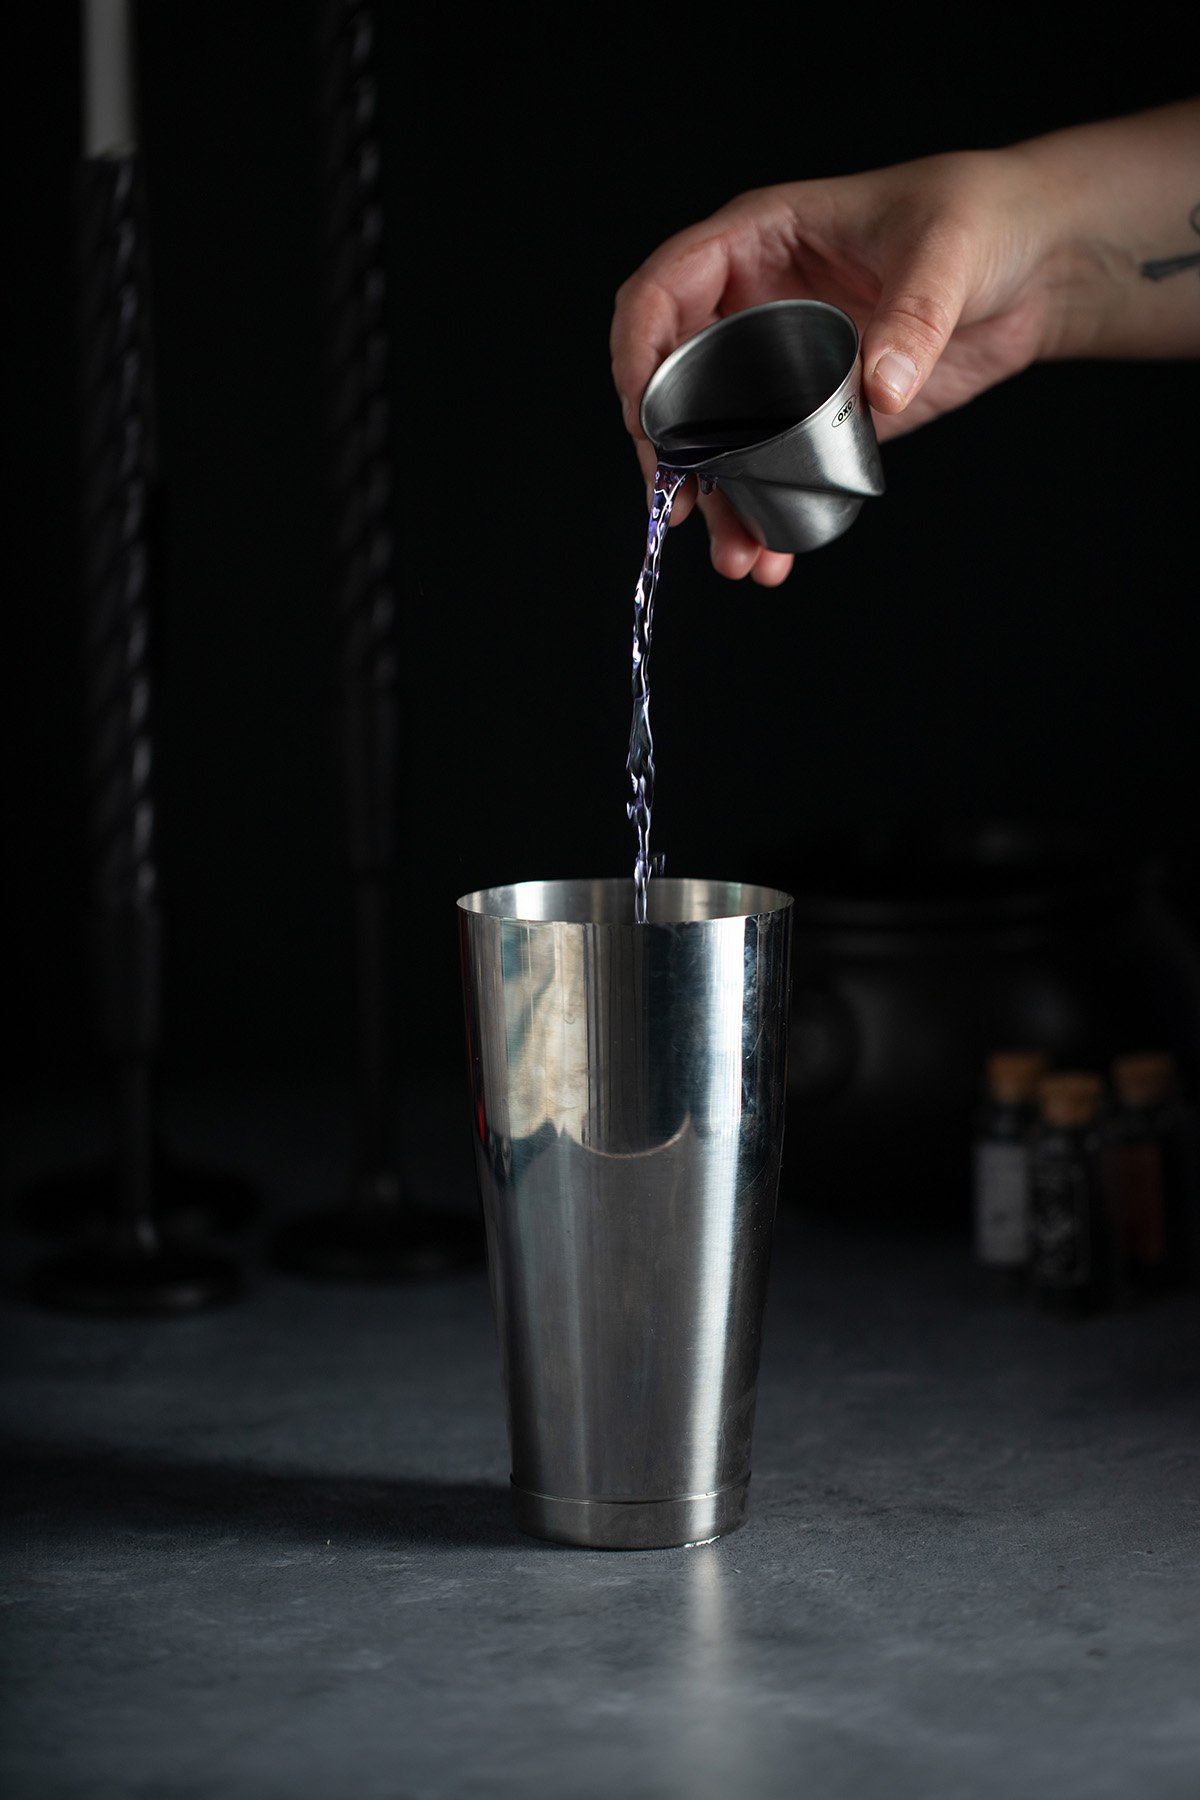 purple gin being poured into a cocktail shaker.